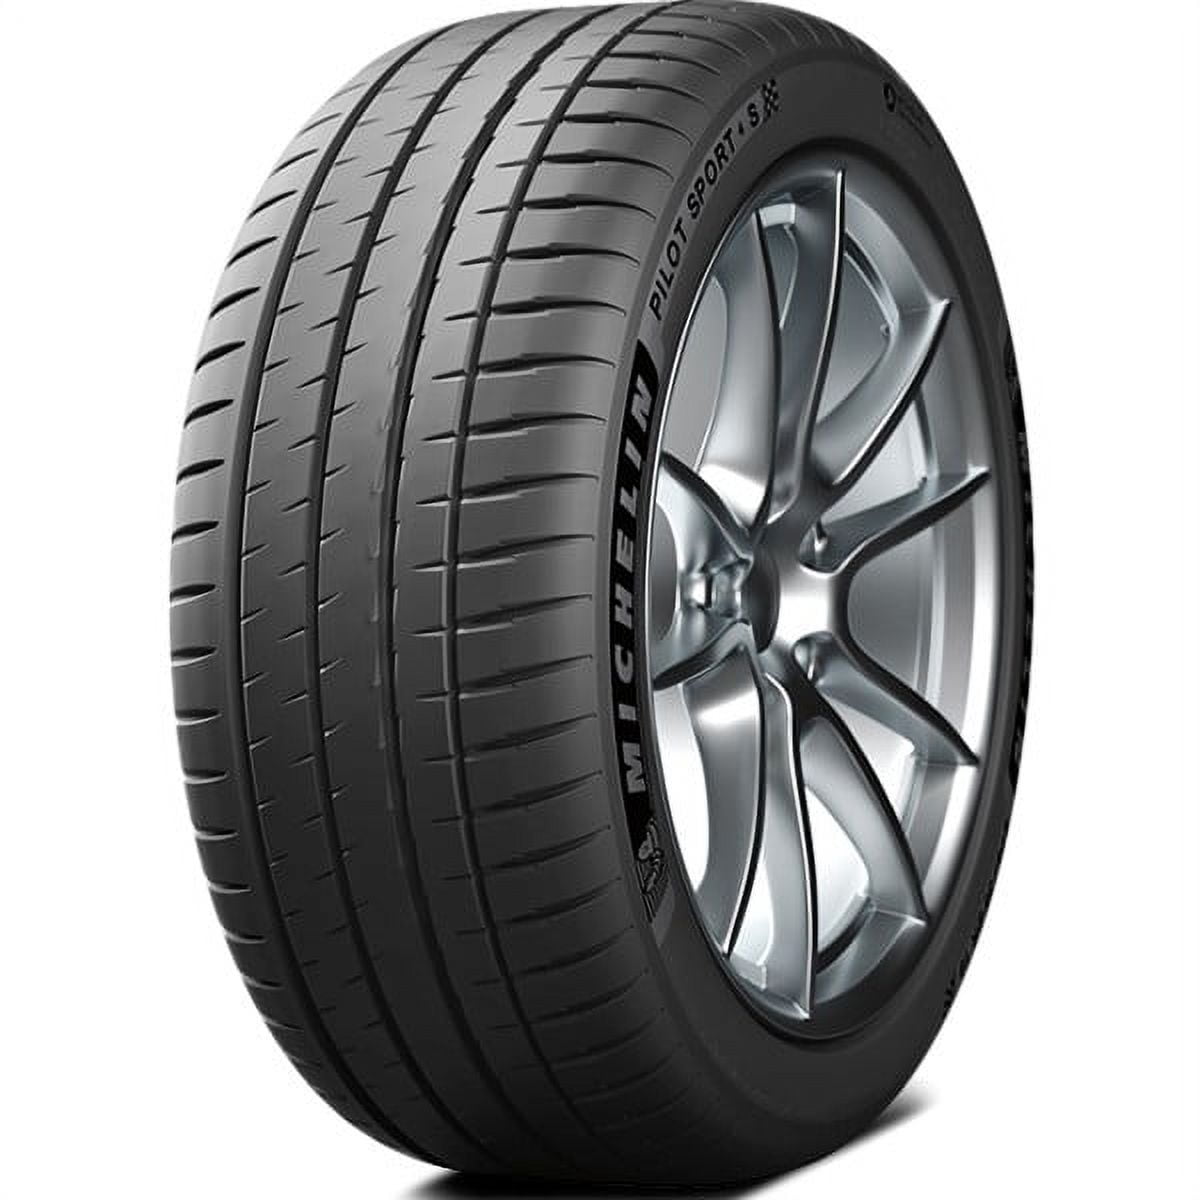 Sport Michelin MH43847 Summer Focus / 4S 235/40R18 Civic Max MILE Ford Fits: 2012-18 95Y 235/40/18 Touring Titanium, Set Performance 4 Sport / 30000 Tires 2017-23 2354018 Pilot Honda of